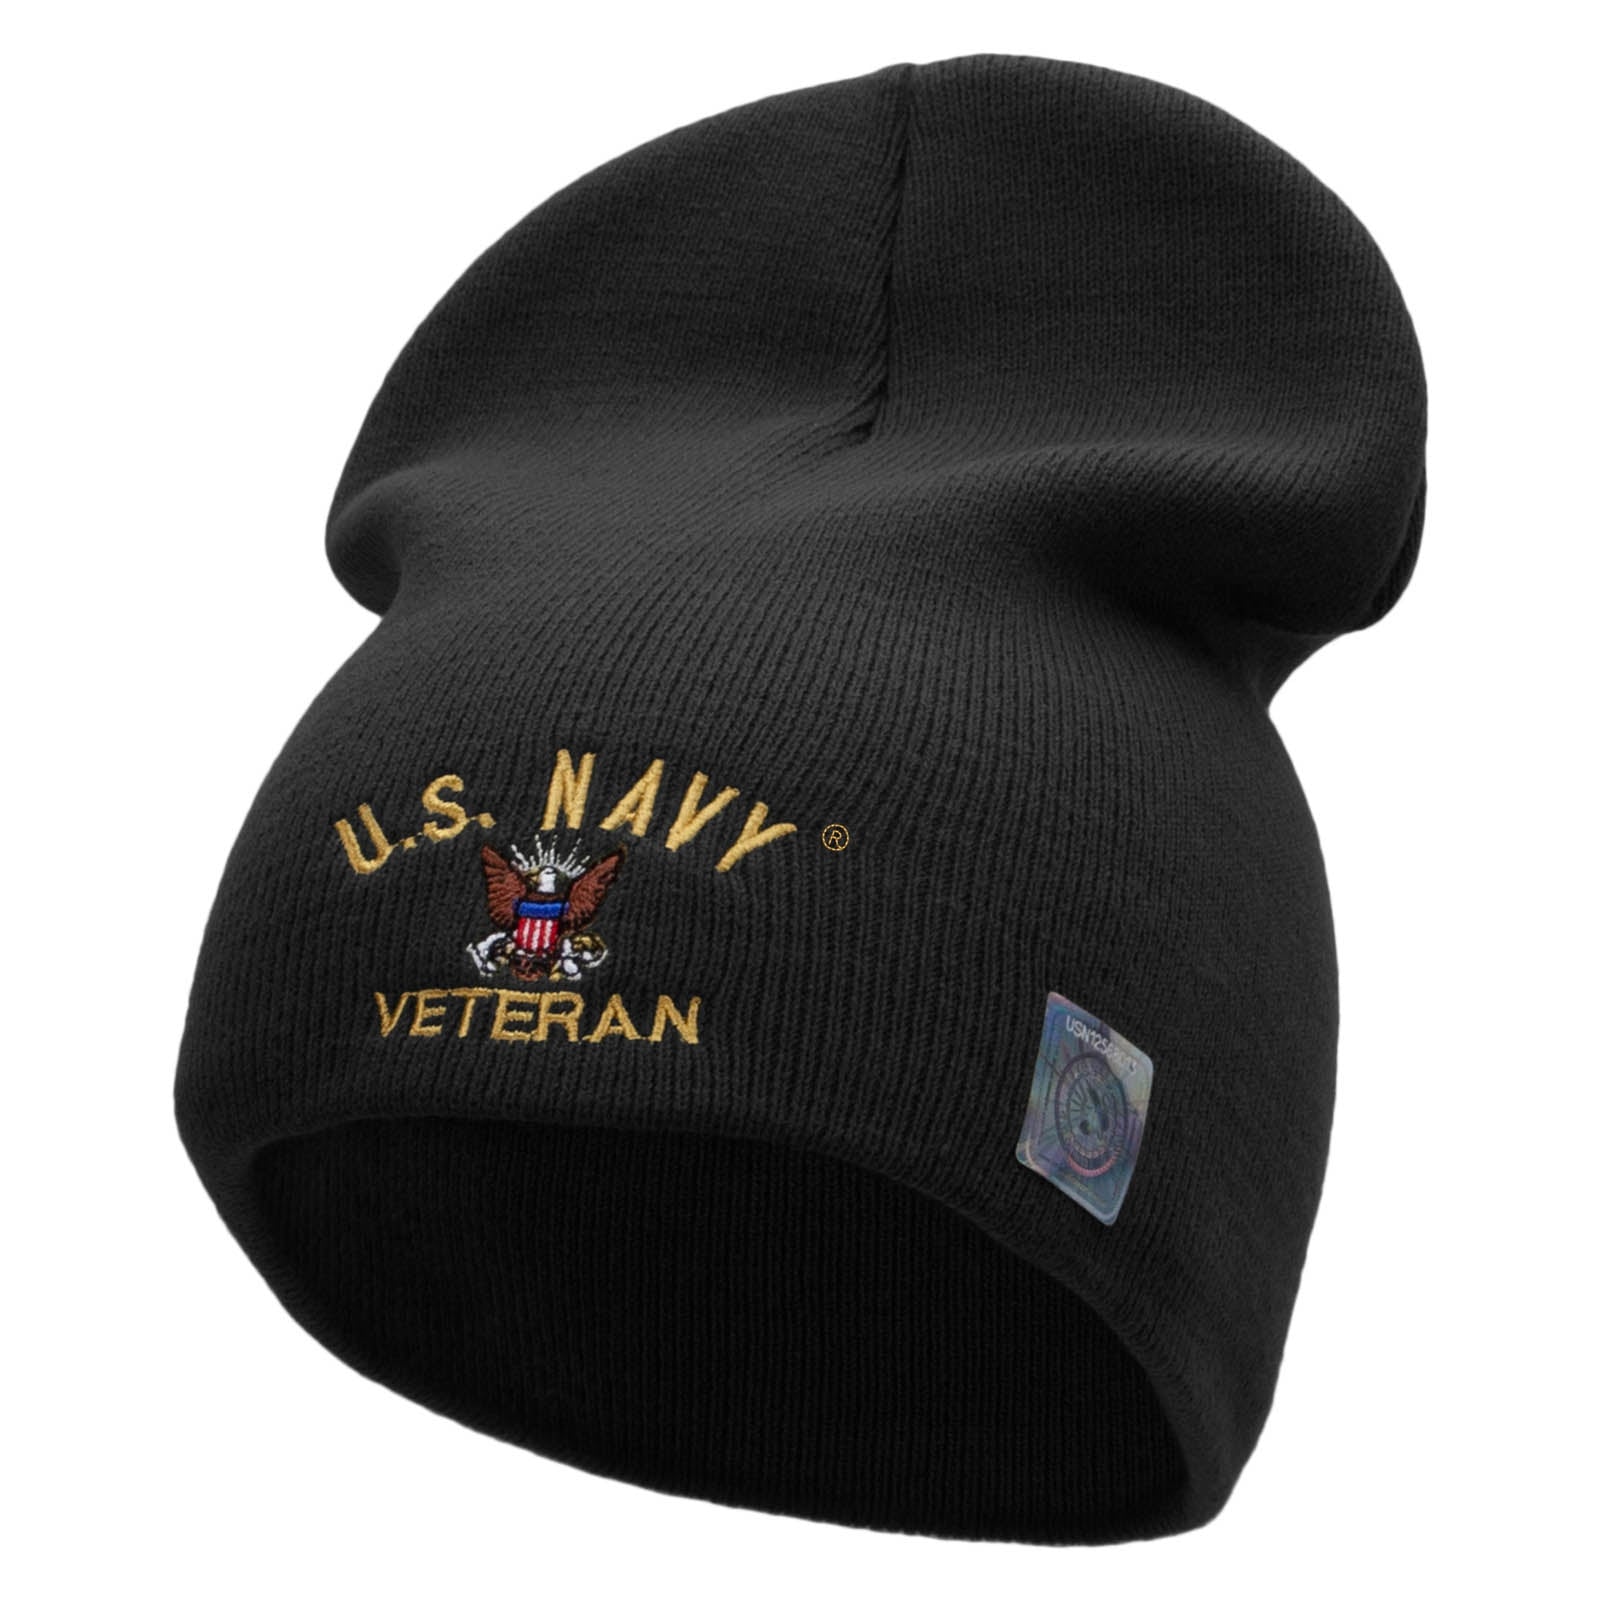 Licensed US Navy Veteran Military Embroidered Short Beanie Made in USA - Black OSFM